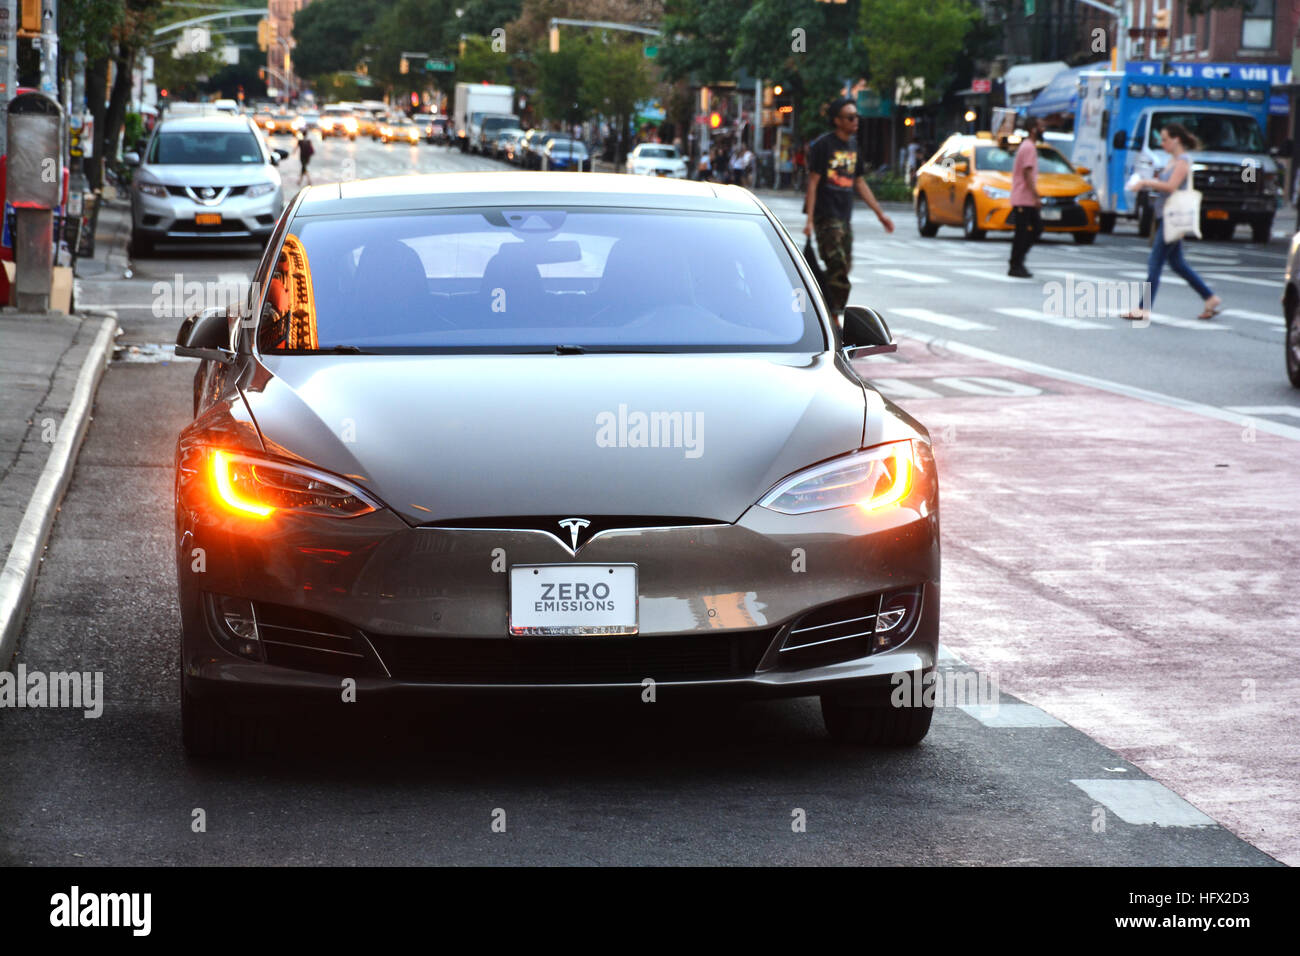 Tesla electric car with ZERO EMISSIONS text on the license plate waiting at traffic lights Stock Photo